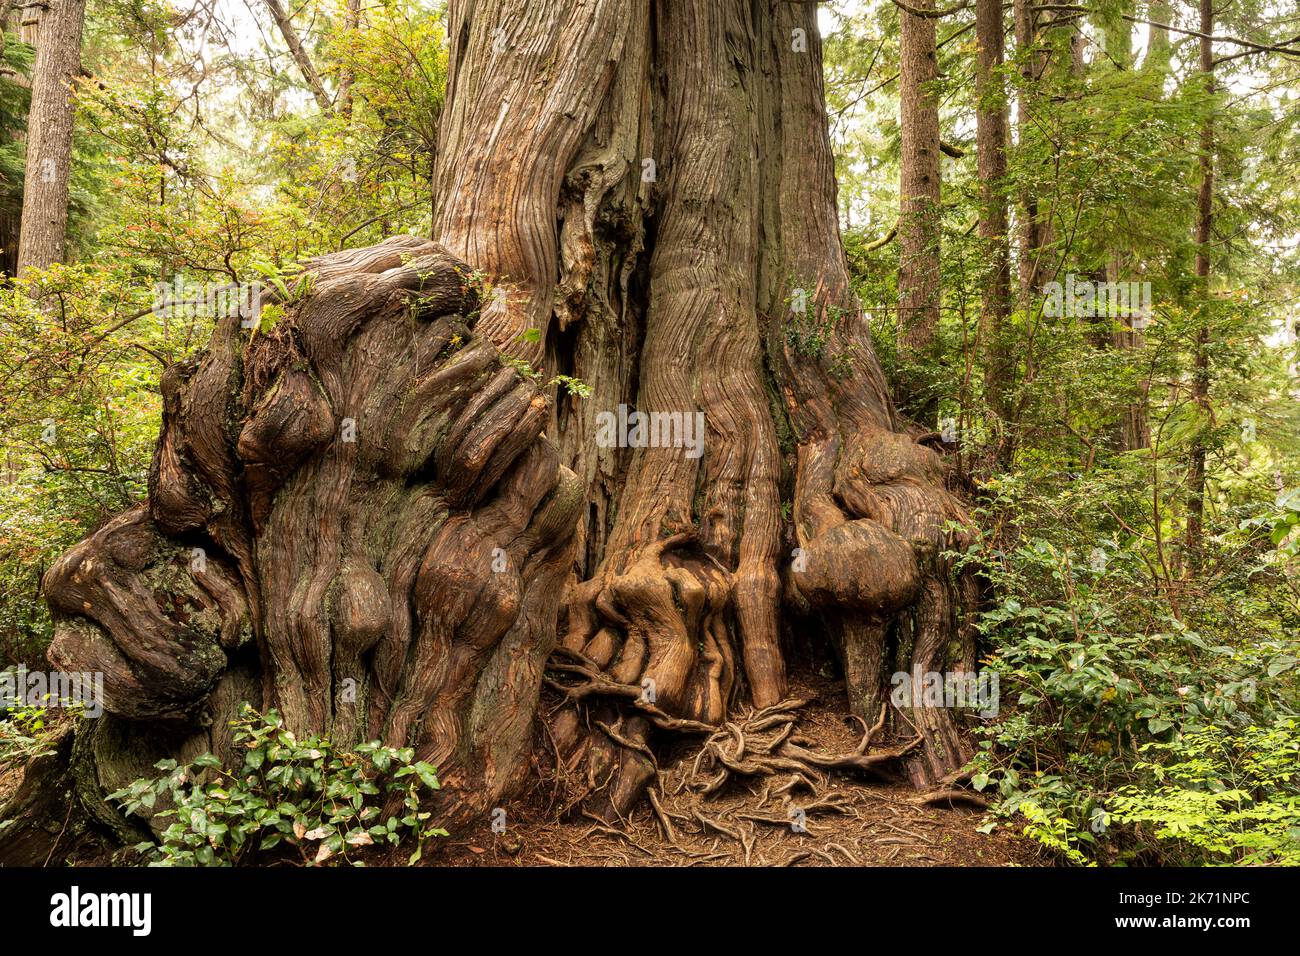 WA22303-00...WASHINGTON - The base of a giant Western Red Cedar in the Grove of Big Cedars, part of Olympic National Park. Stock Photo